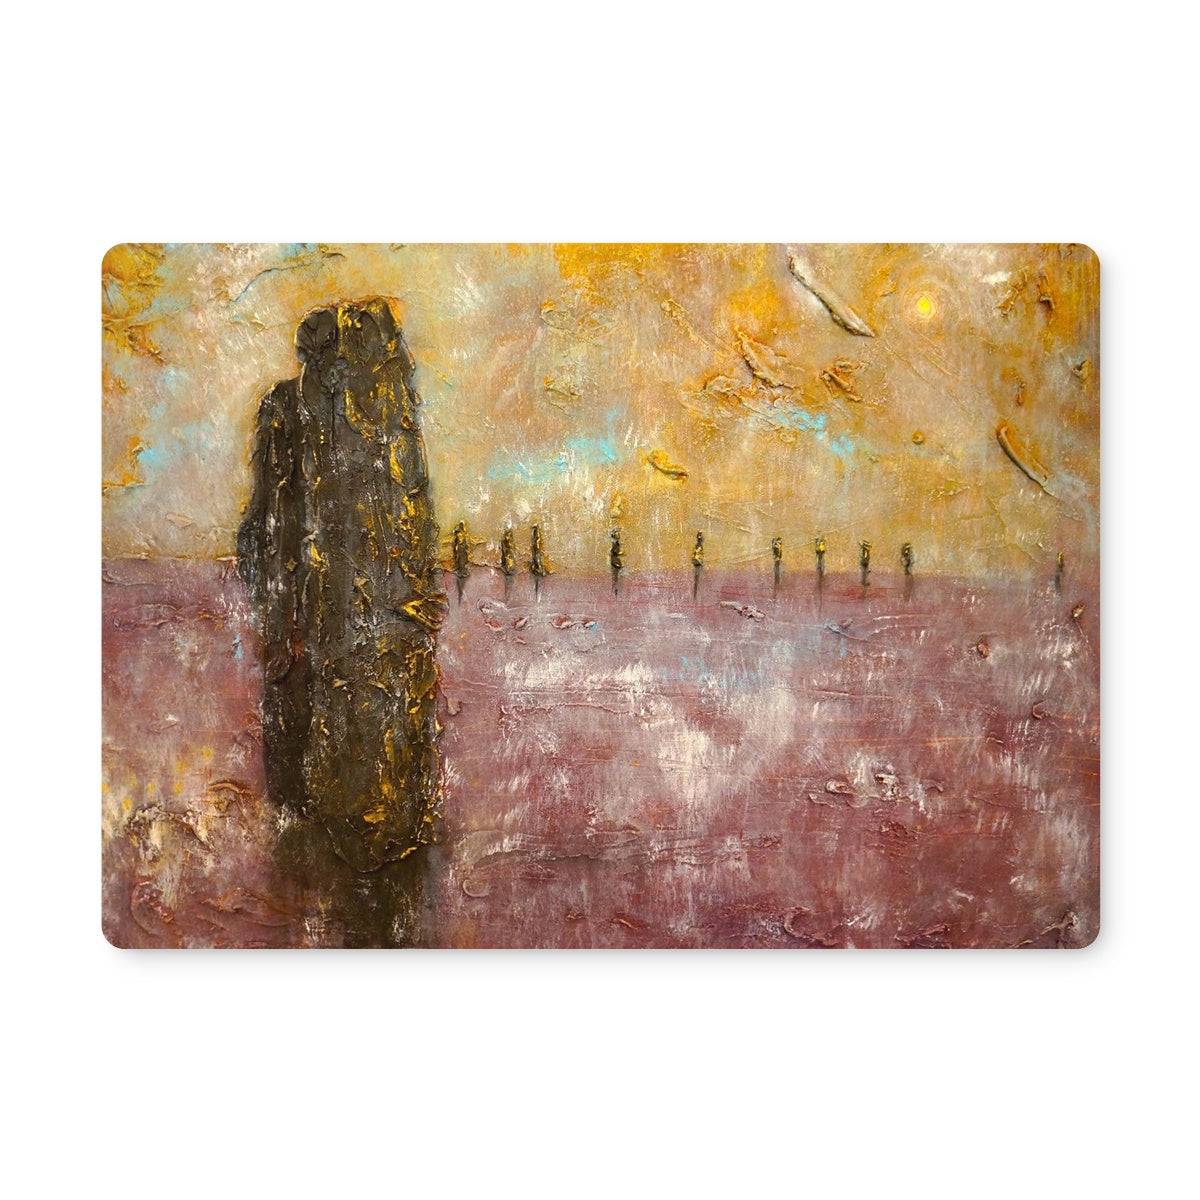 Bordgar Mist Orkney Art Gifts Placemat-Placemats-Orkney Art Gallery-Single Placemat-Paintings, Prints, Homeware, Art Gifts From Scotland By Scottish Artist Kevin Hunter